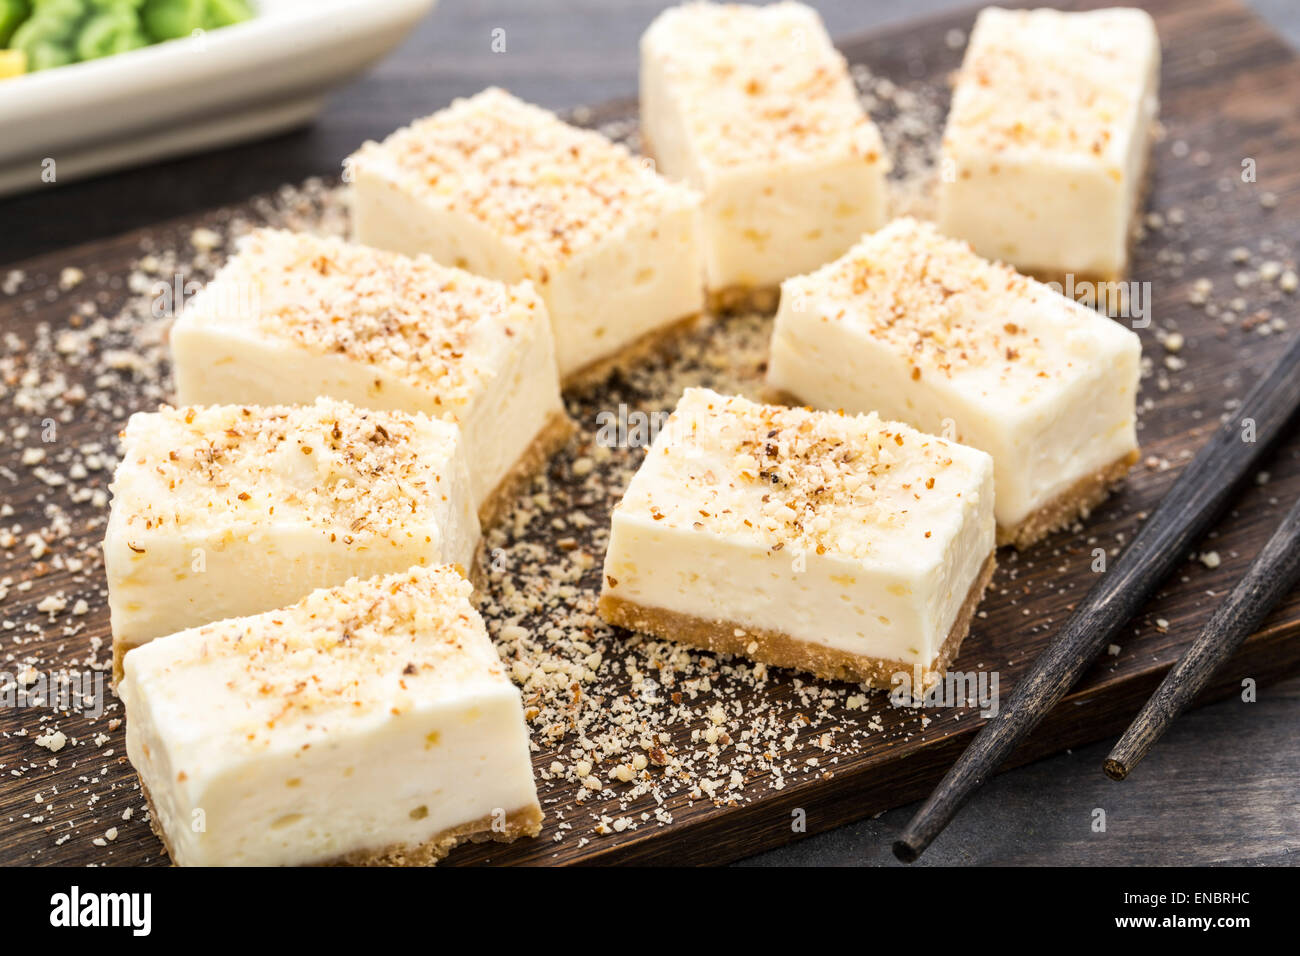 Sweet cheesecake with almond. Served in sushi restaurant Stock Photo